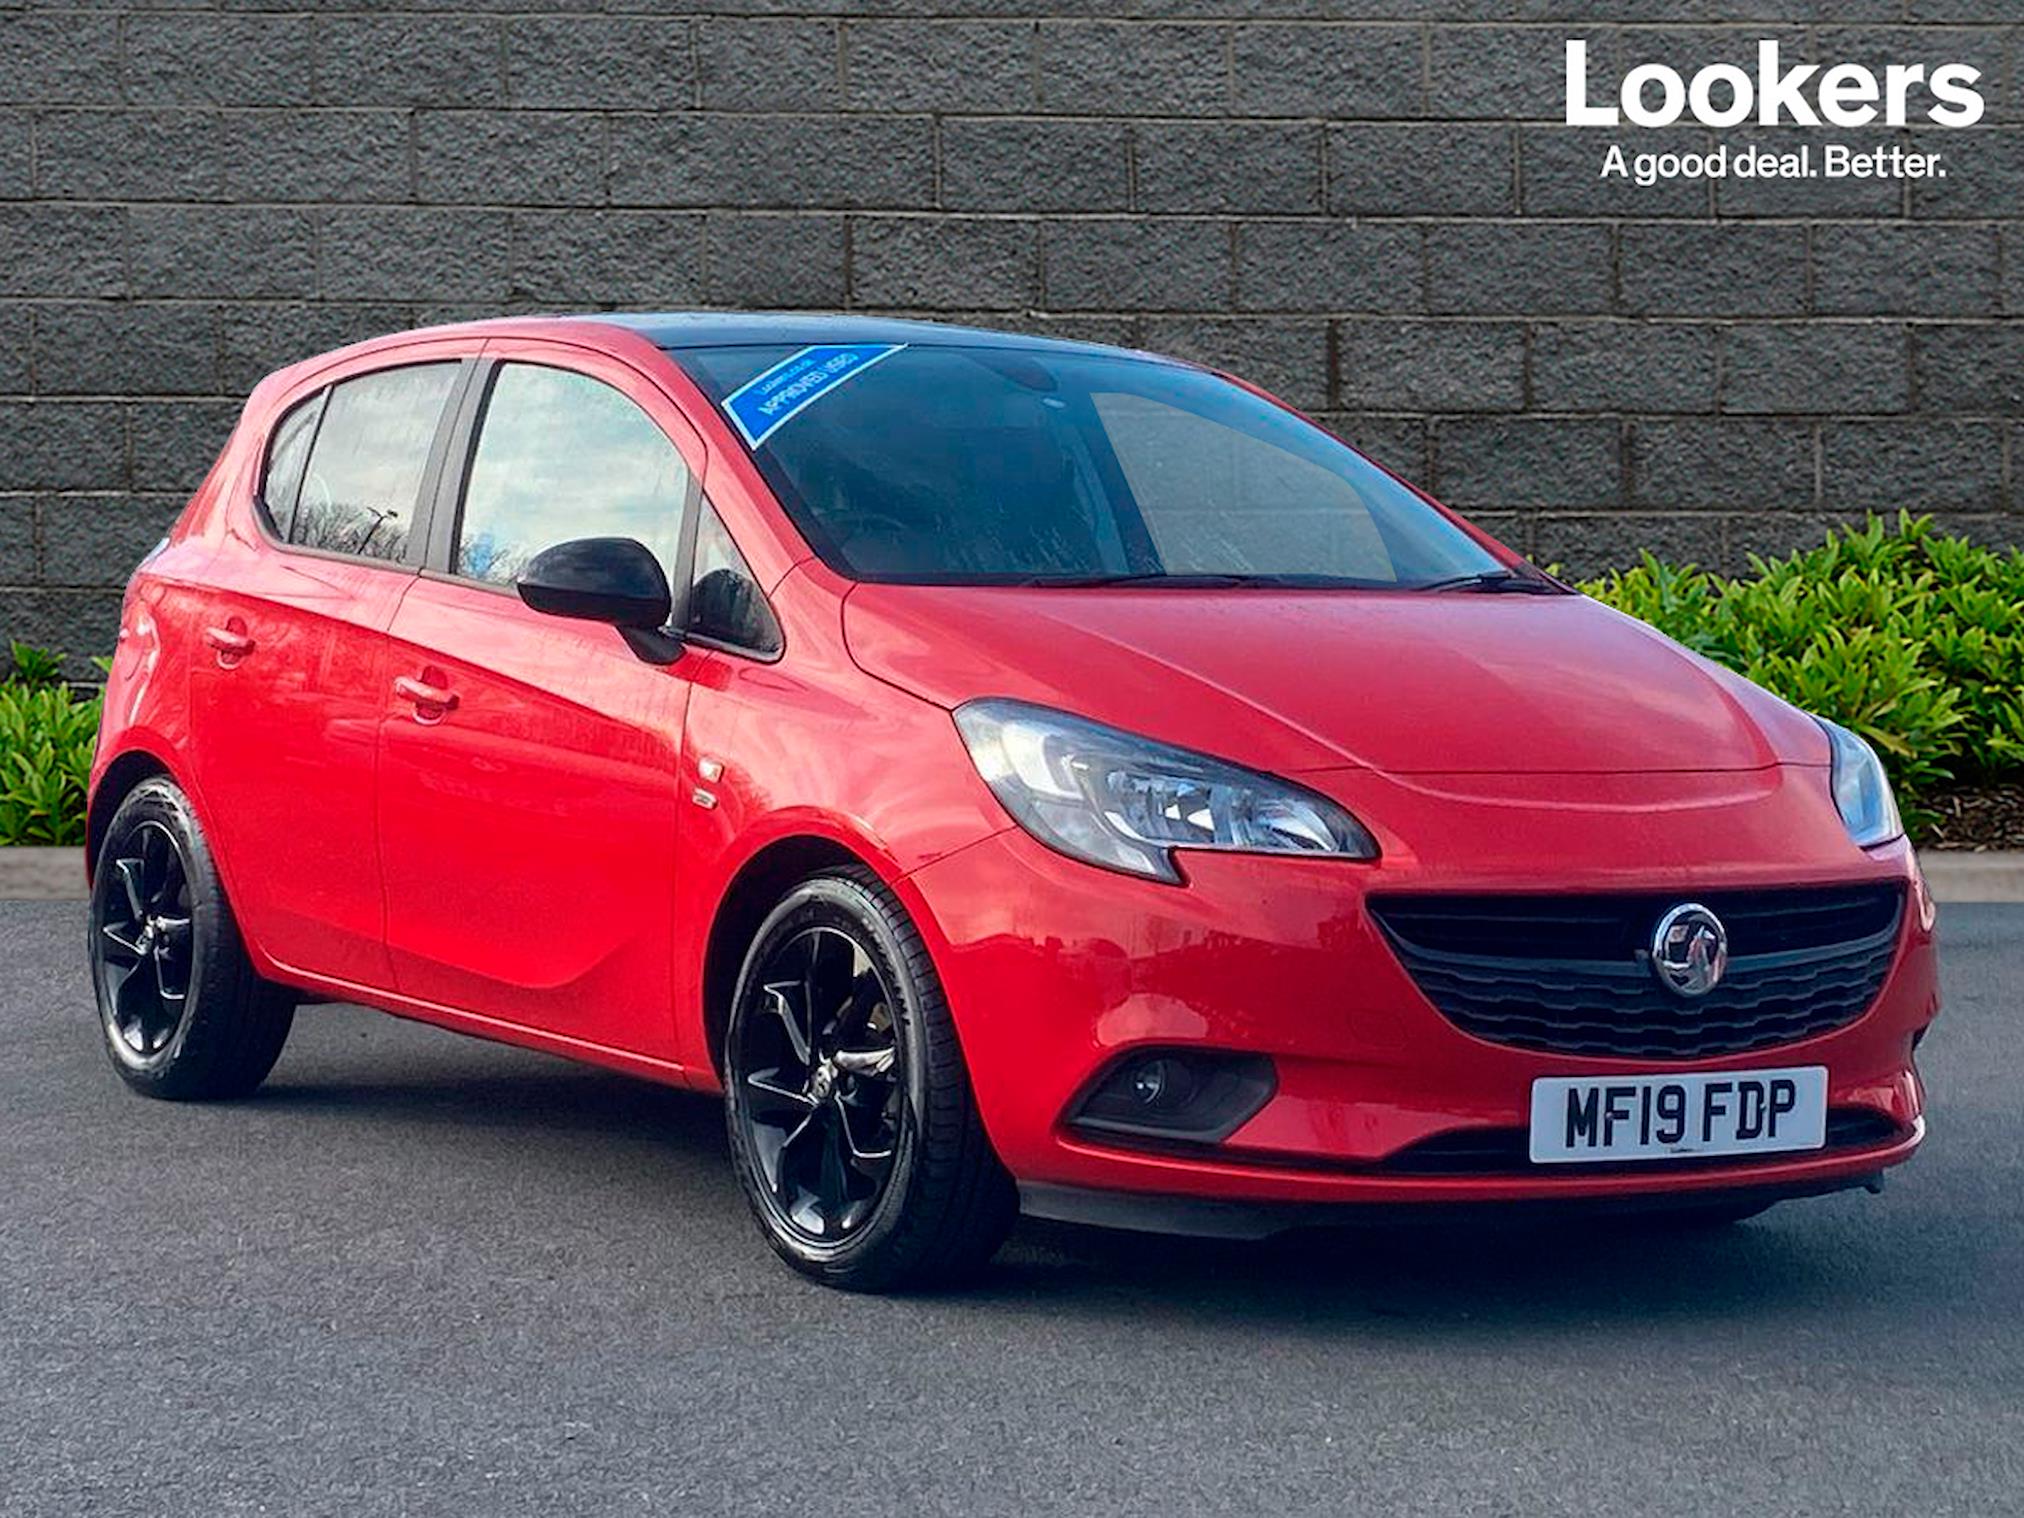 Used VAUXHALL CORSA 1.4 [75] Griffin 5Dr 2019